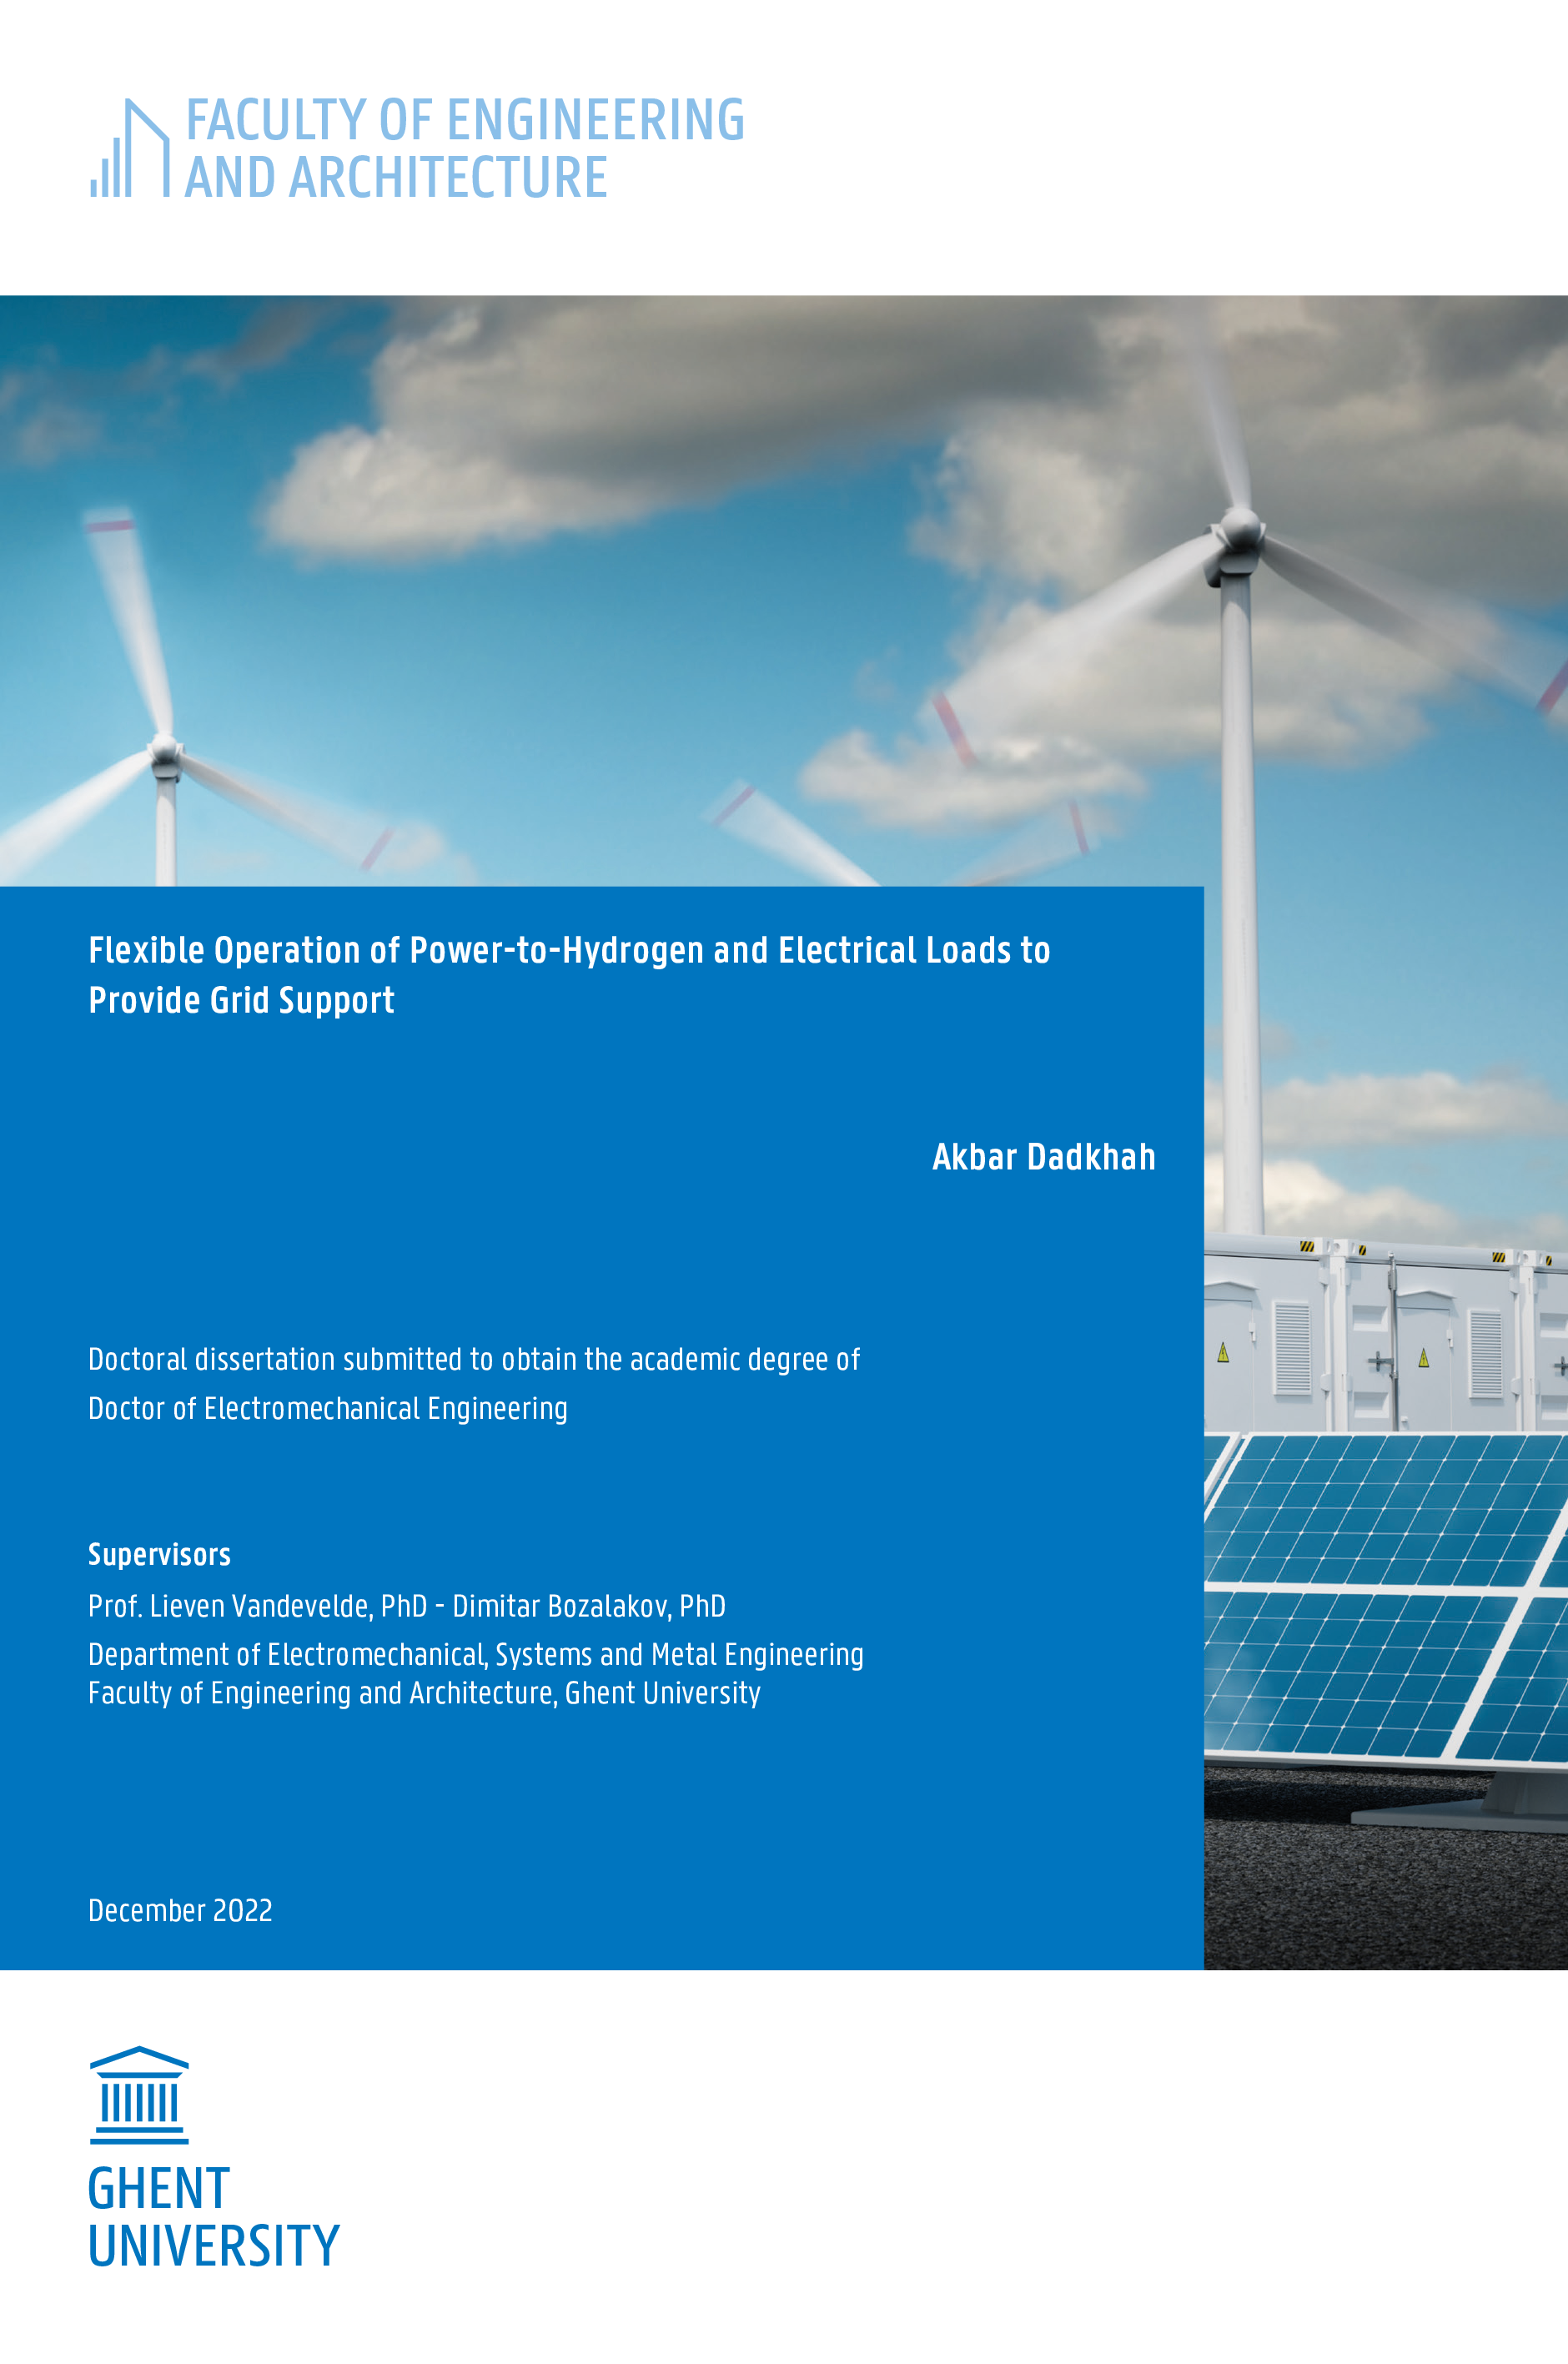 Flexible Operation of Power-to-Hydrogen and Electrical Loads to Provide Grid Support